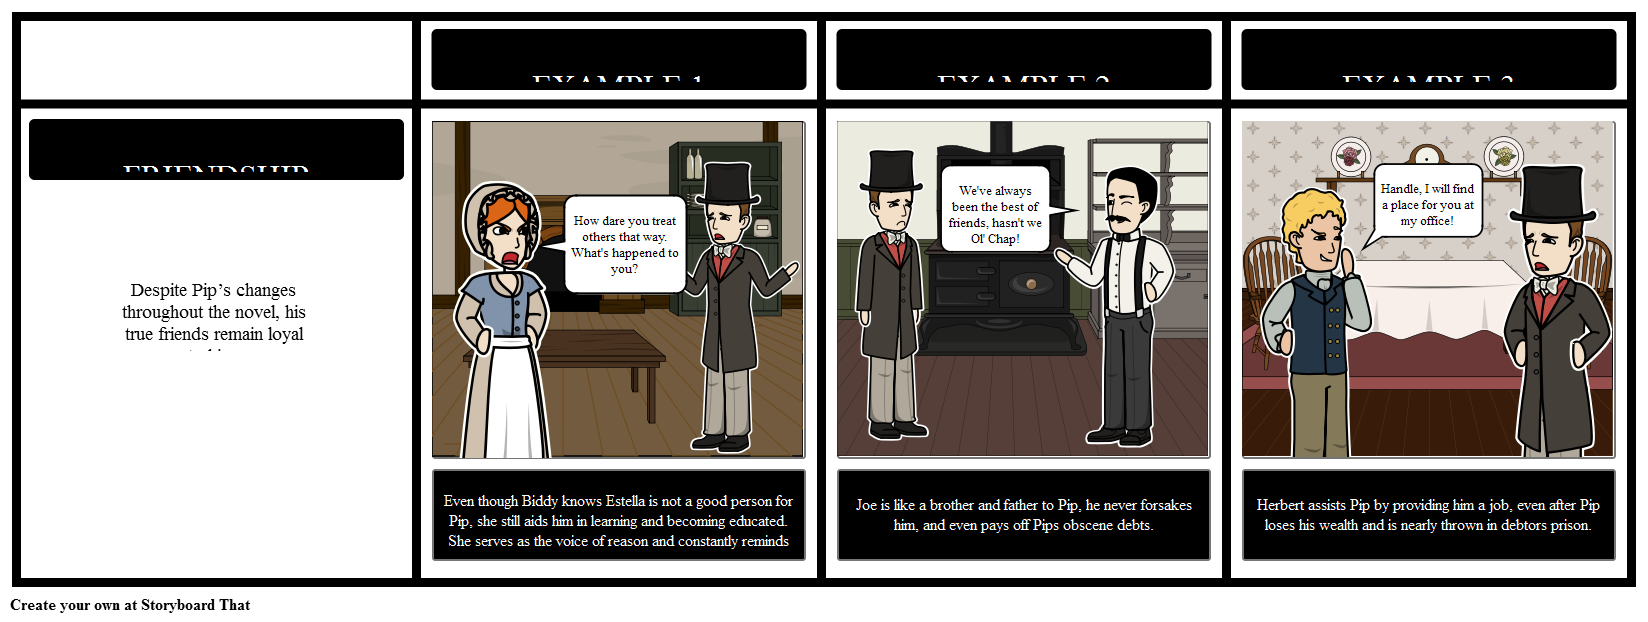 Themes in Great Expectations Storyboard